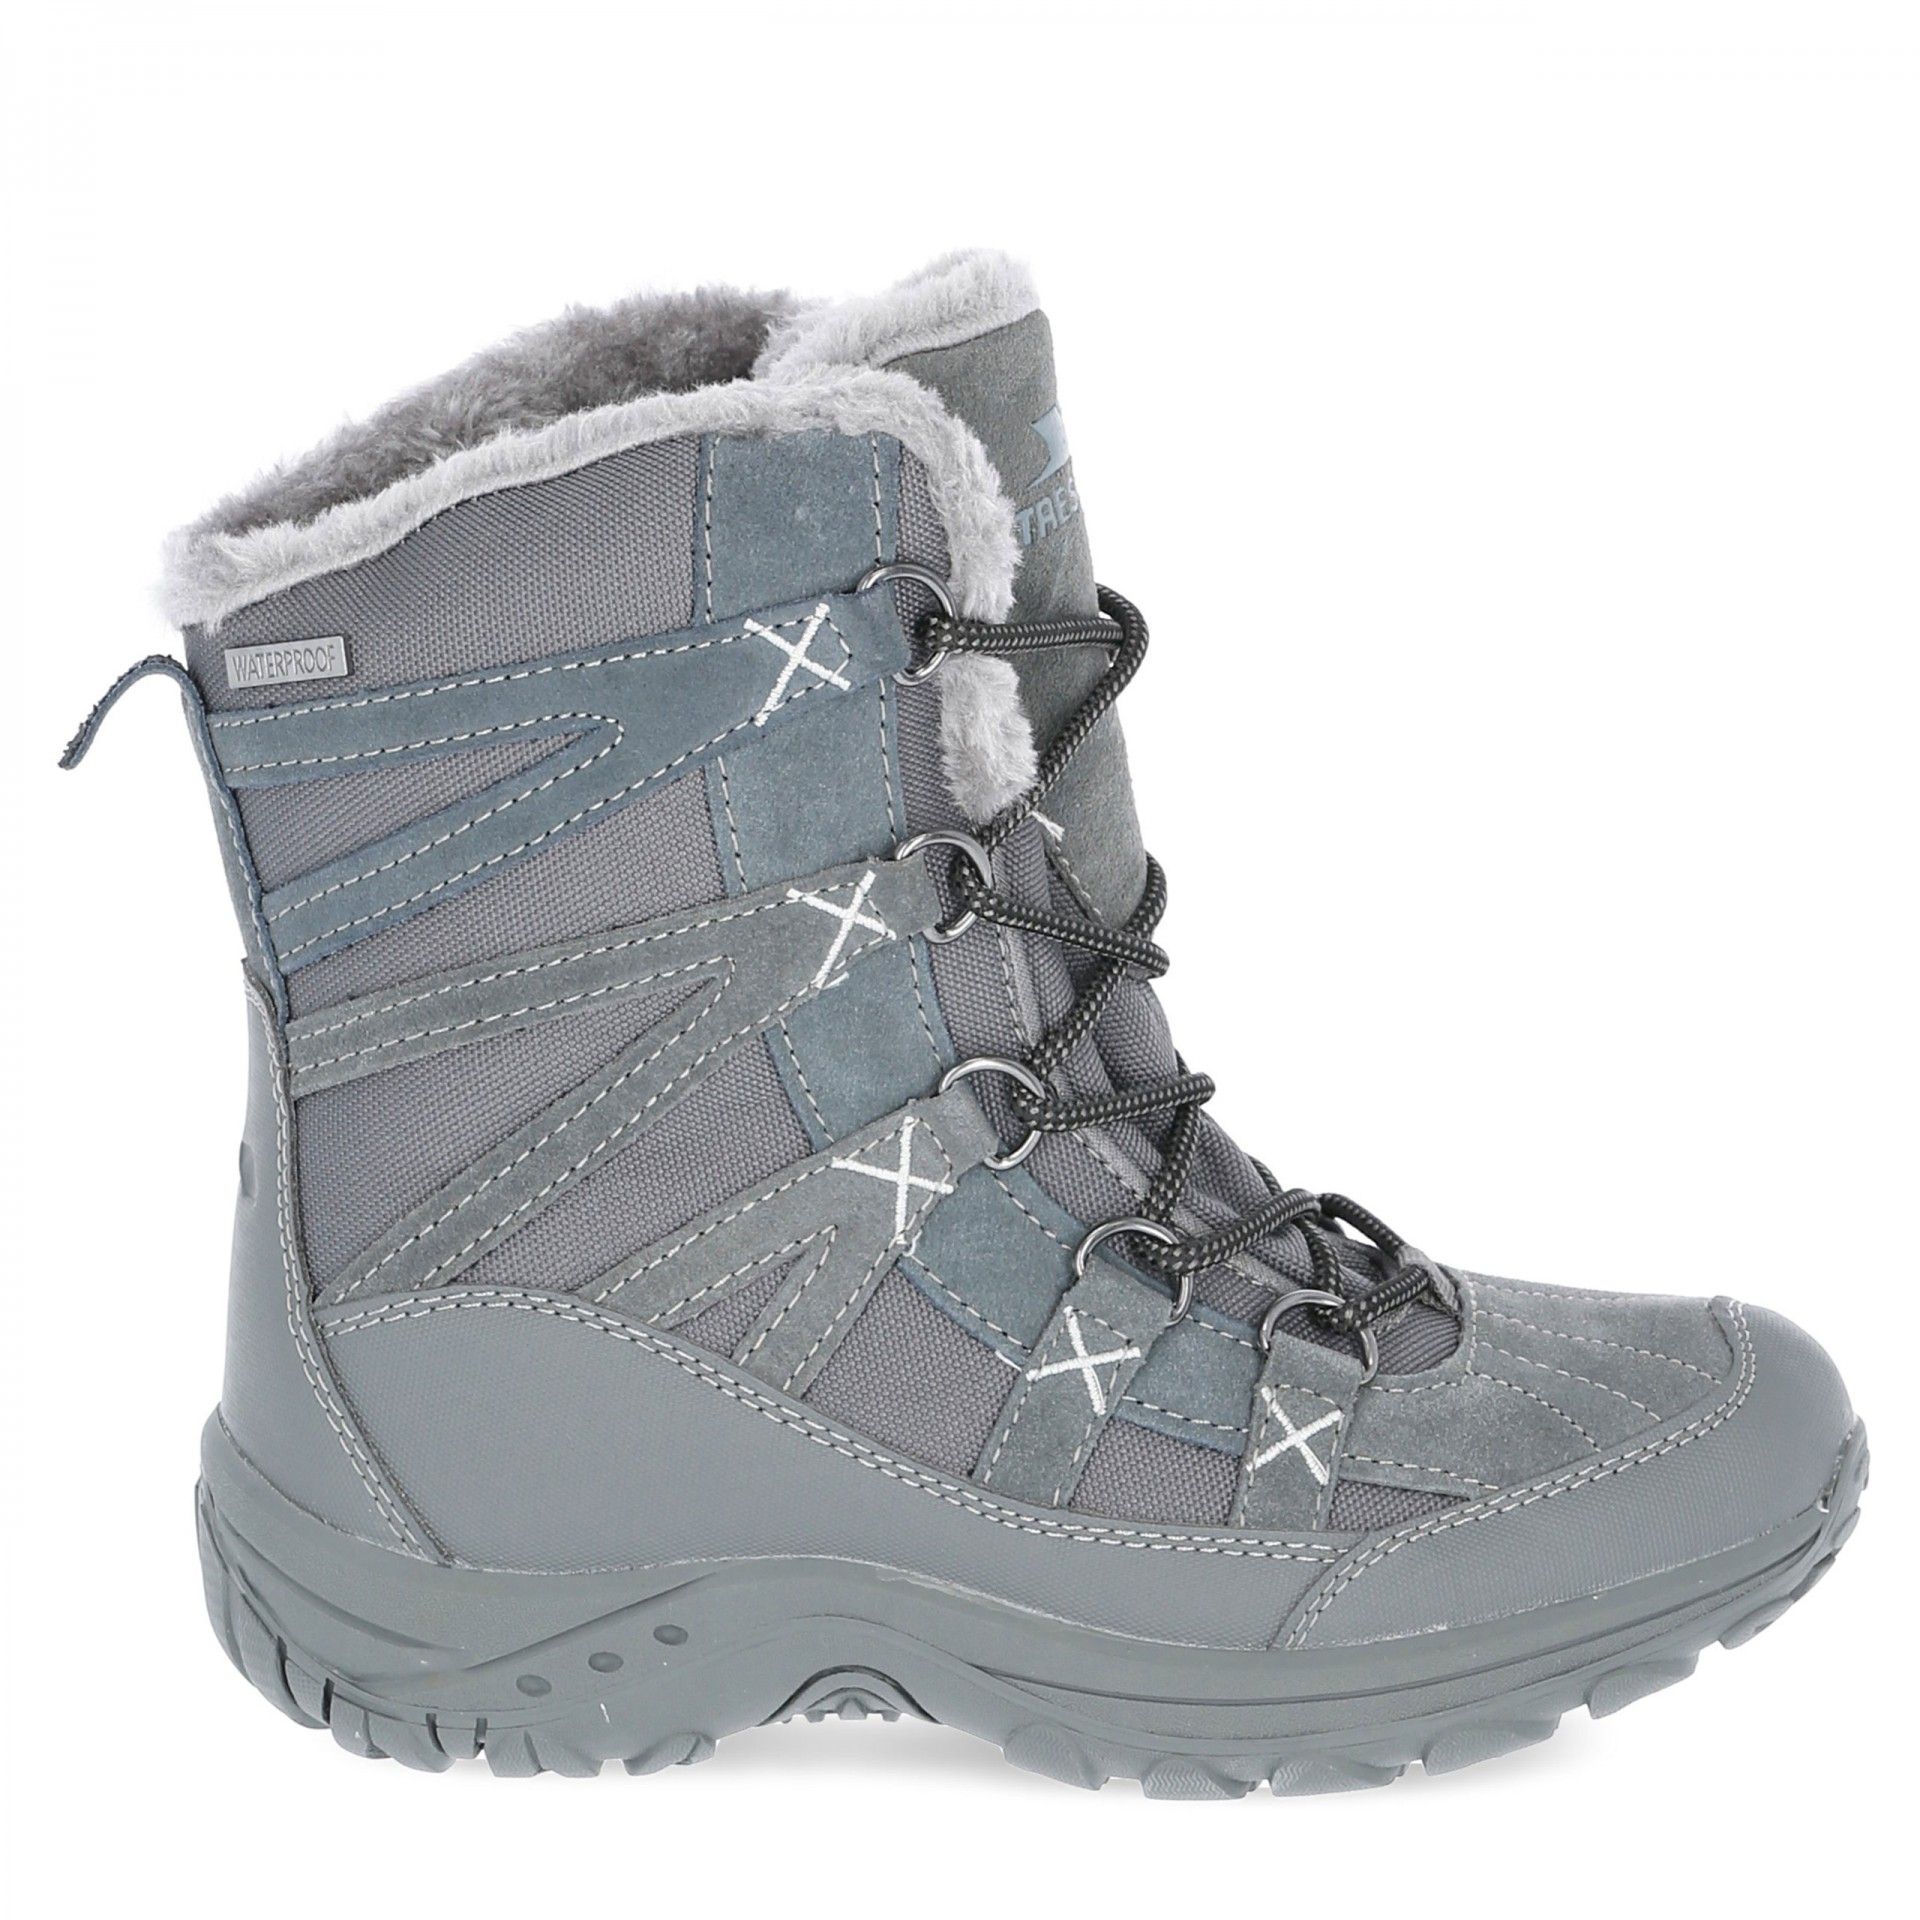 Upper: Textile/Suede/PU, Lining: Faux fur/Fleece, Outsole: TPR. Winter boot. Waterproof membrane. Insulated and warm lined. Gussetted tongue. Protective foxing. Arch stabilising and supportive shank.